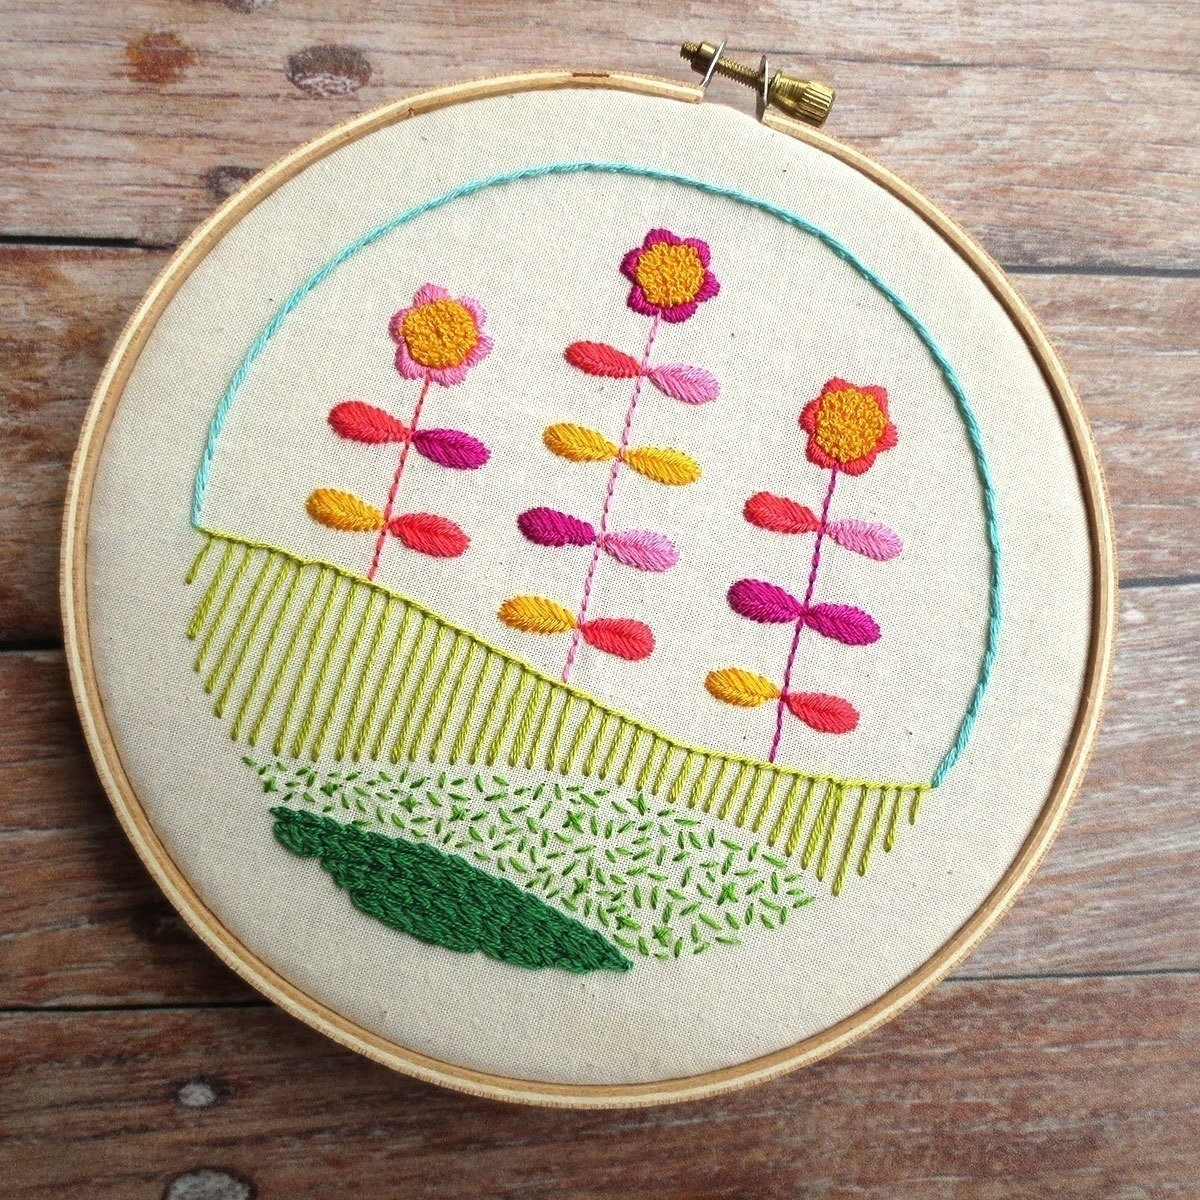 Embroidery Sampler Patterns Free Floral Stitch Sampler How To Embroider Needlework On Cut Out Keep